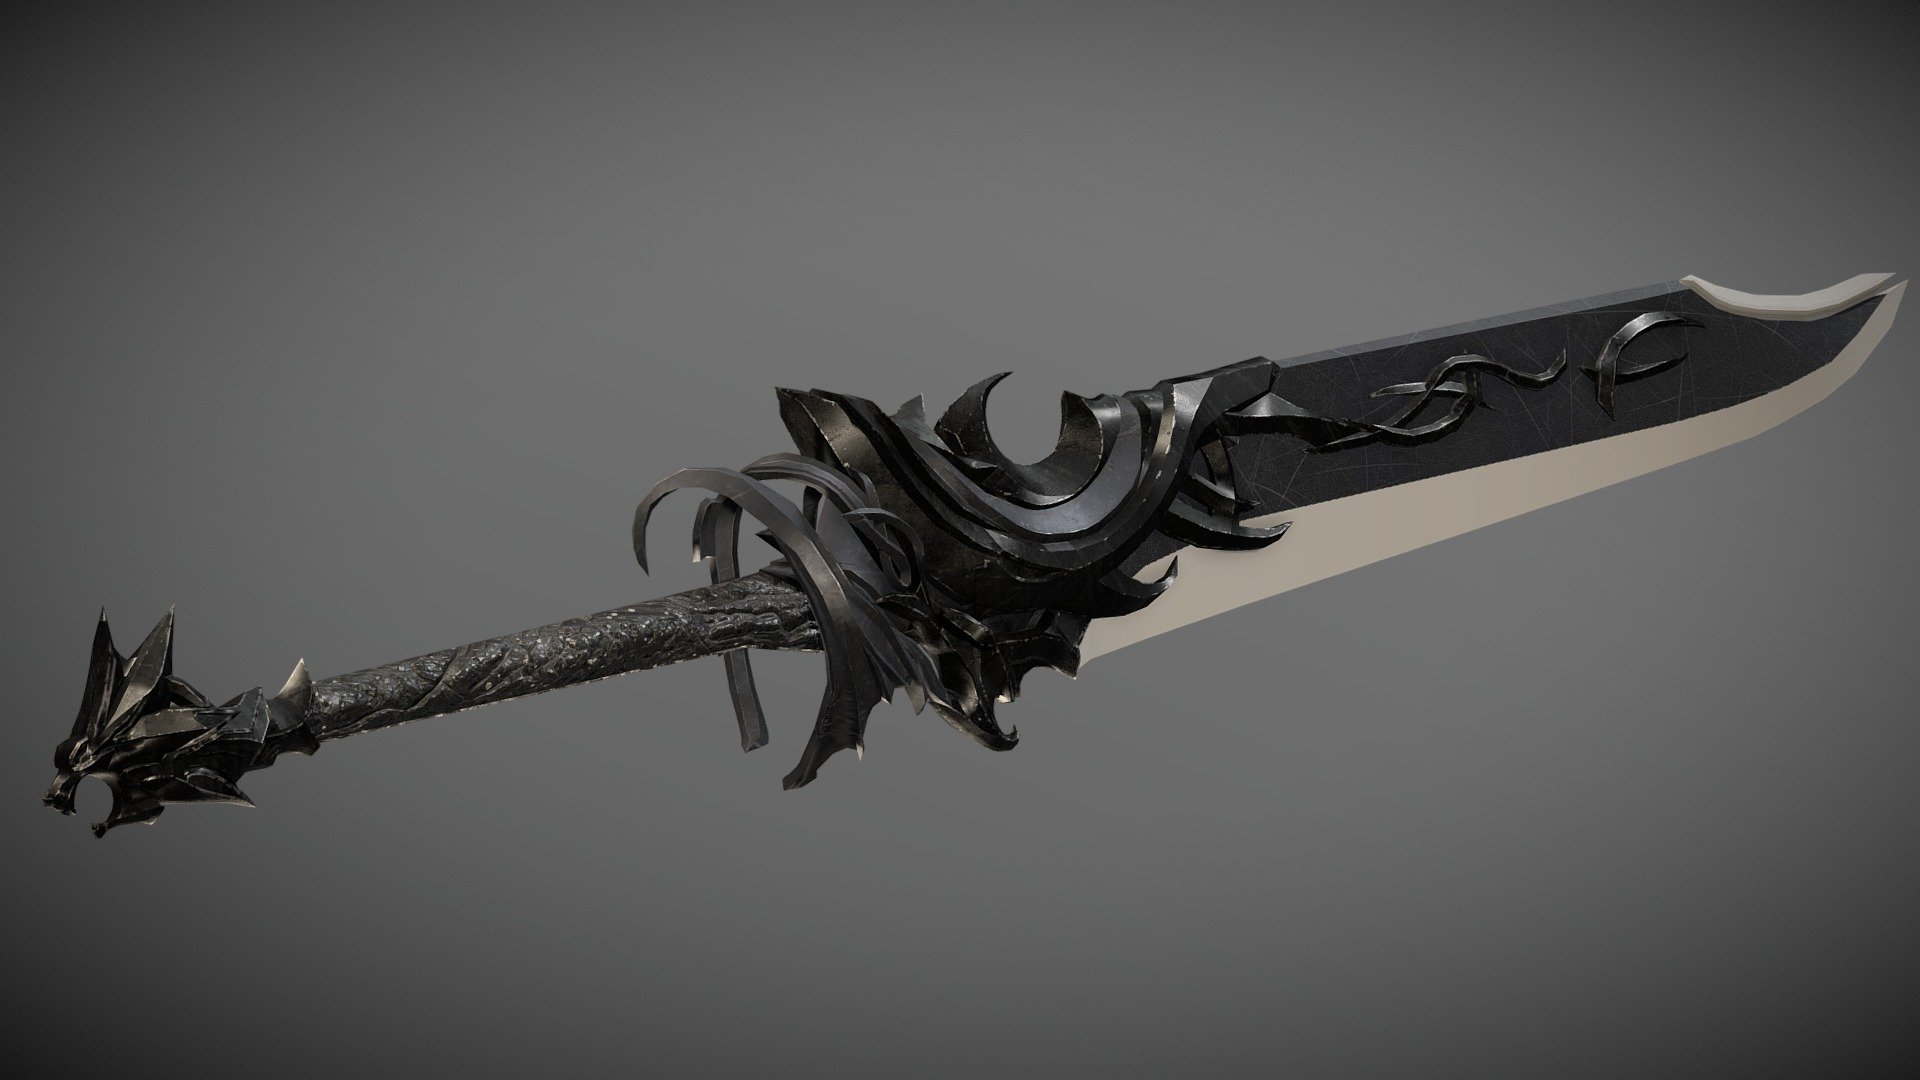 Reference: https://pin.it/59NTinY - Fantasy two handed sword - 3D model by Lycoris (@nickxa000) 3d model